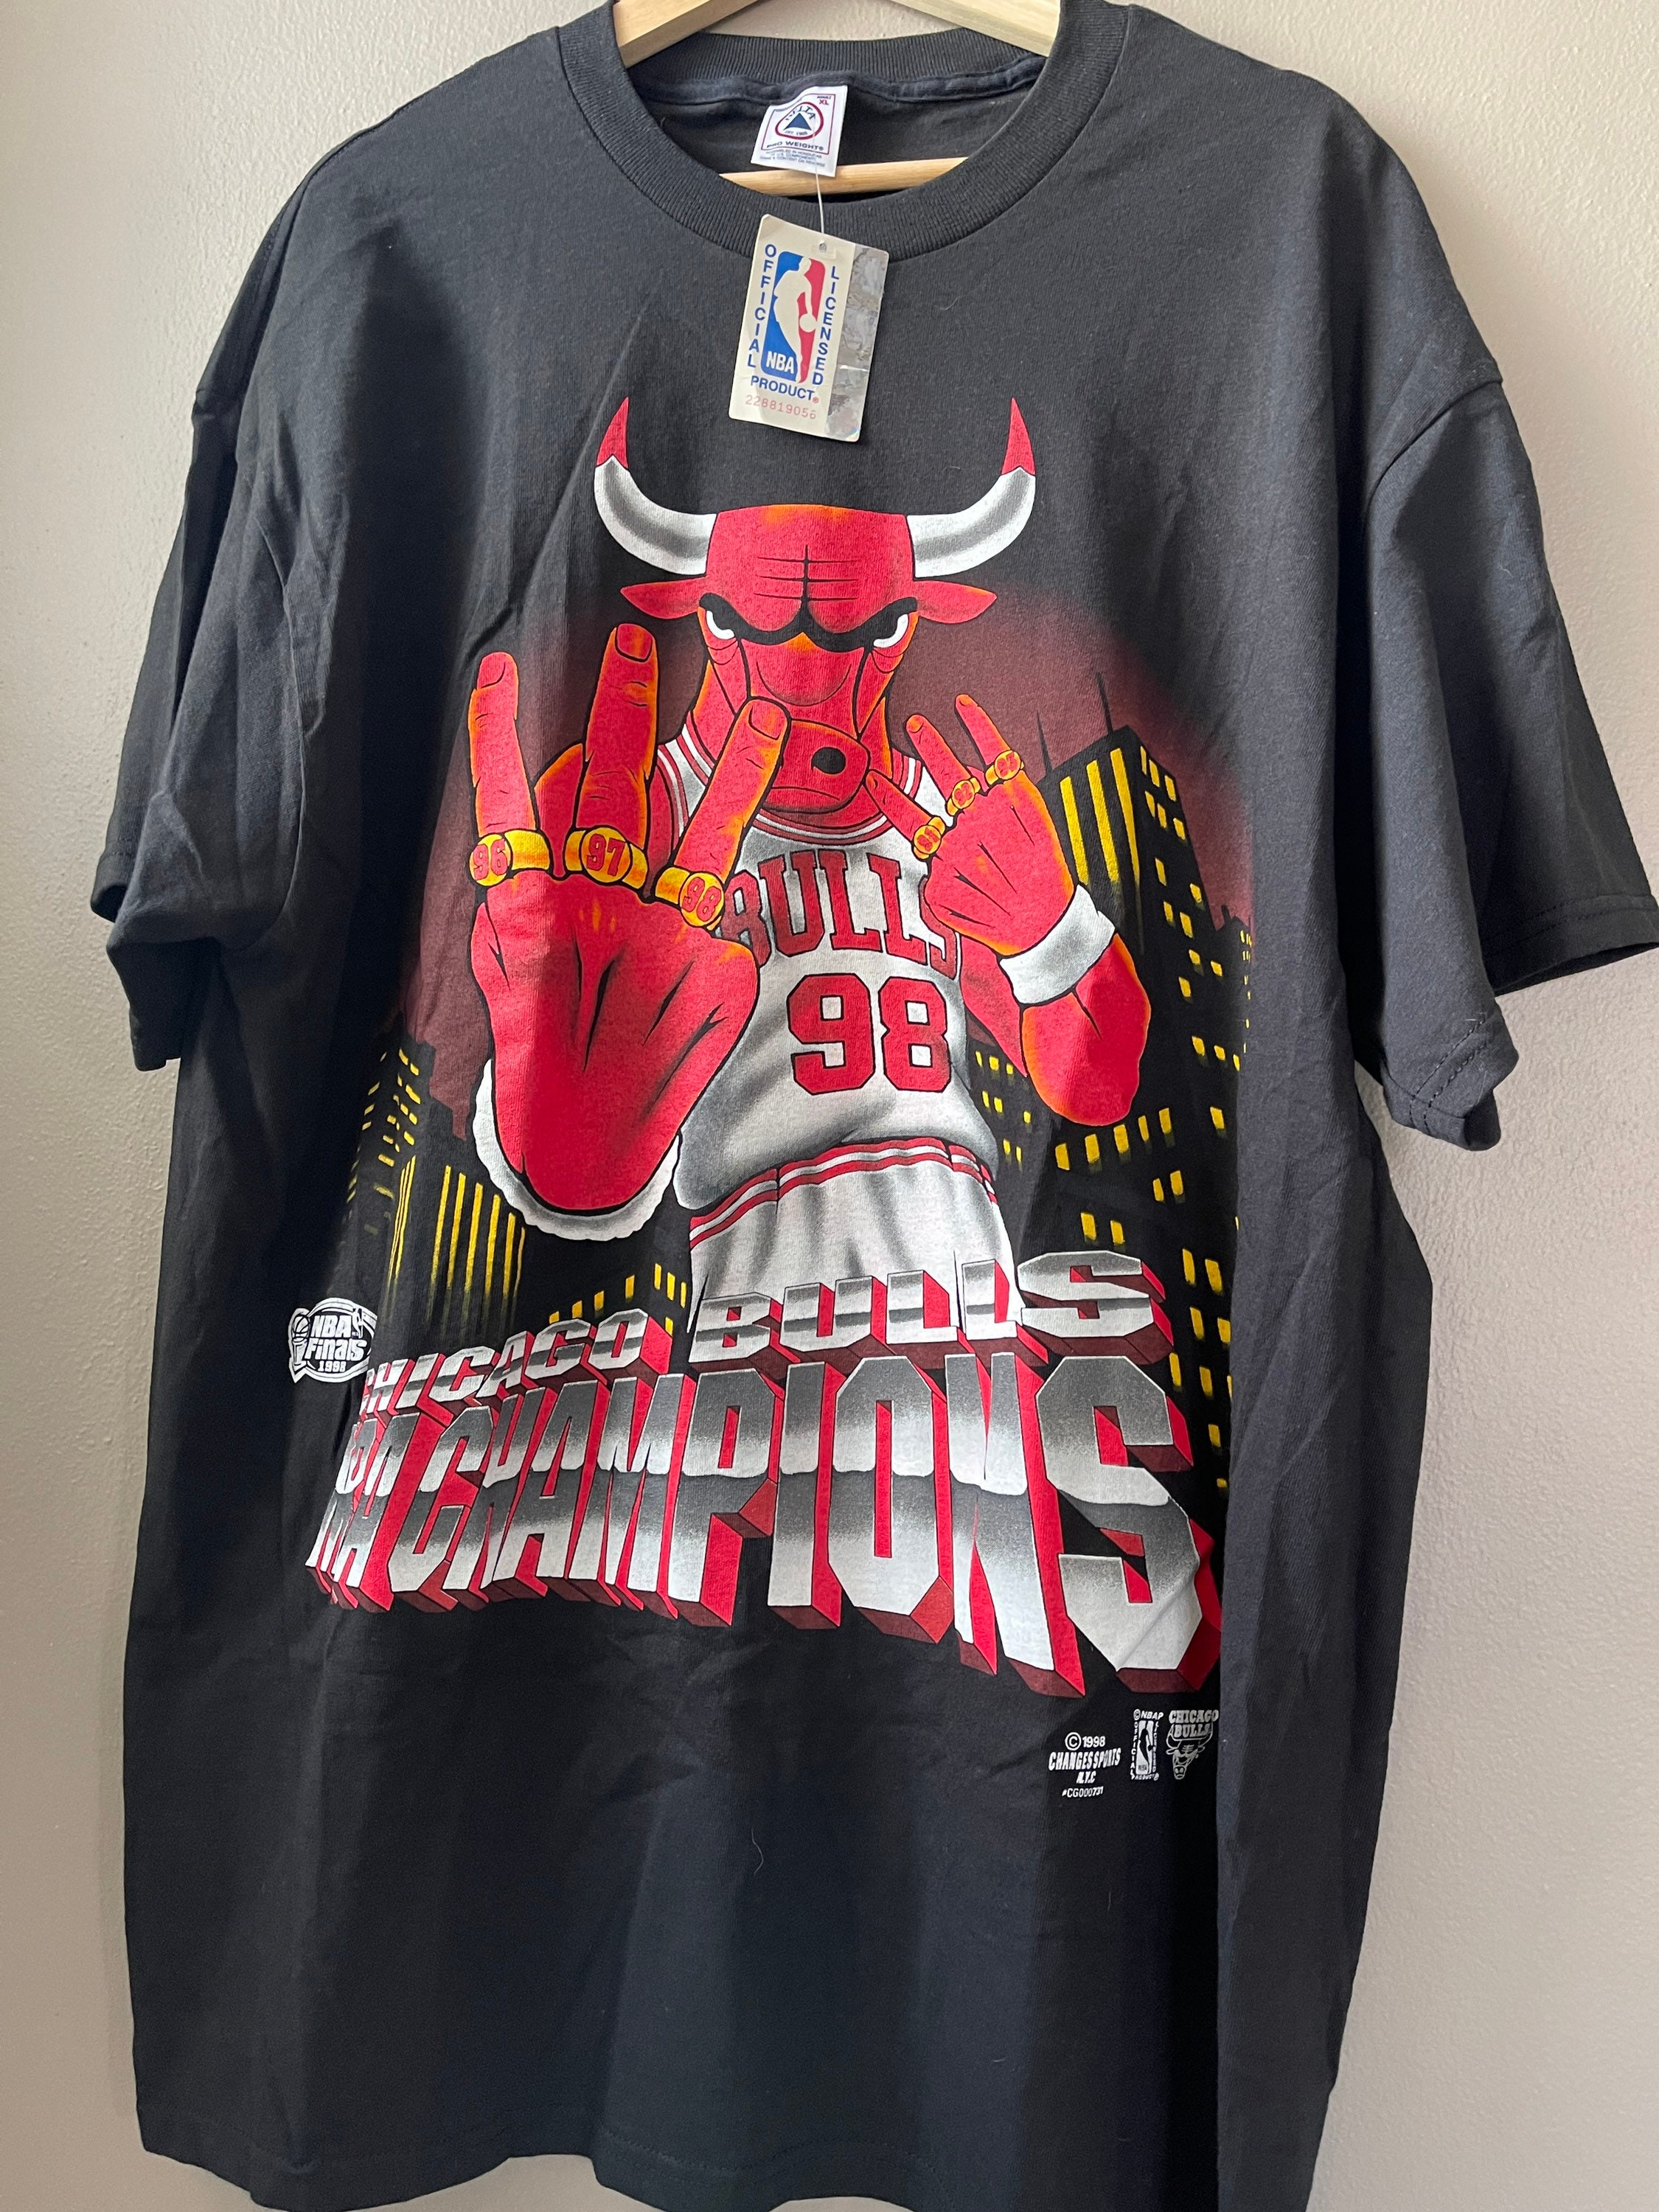 1998 Vintage Chicago Bulls NBA Finals Champions Changes Brand | Etsy